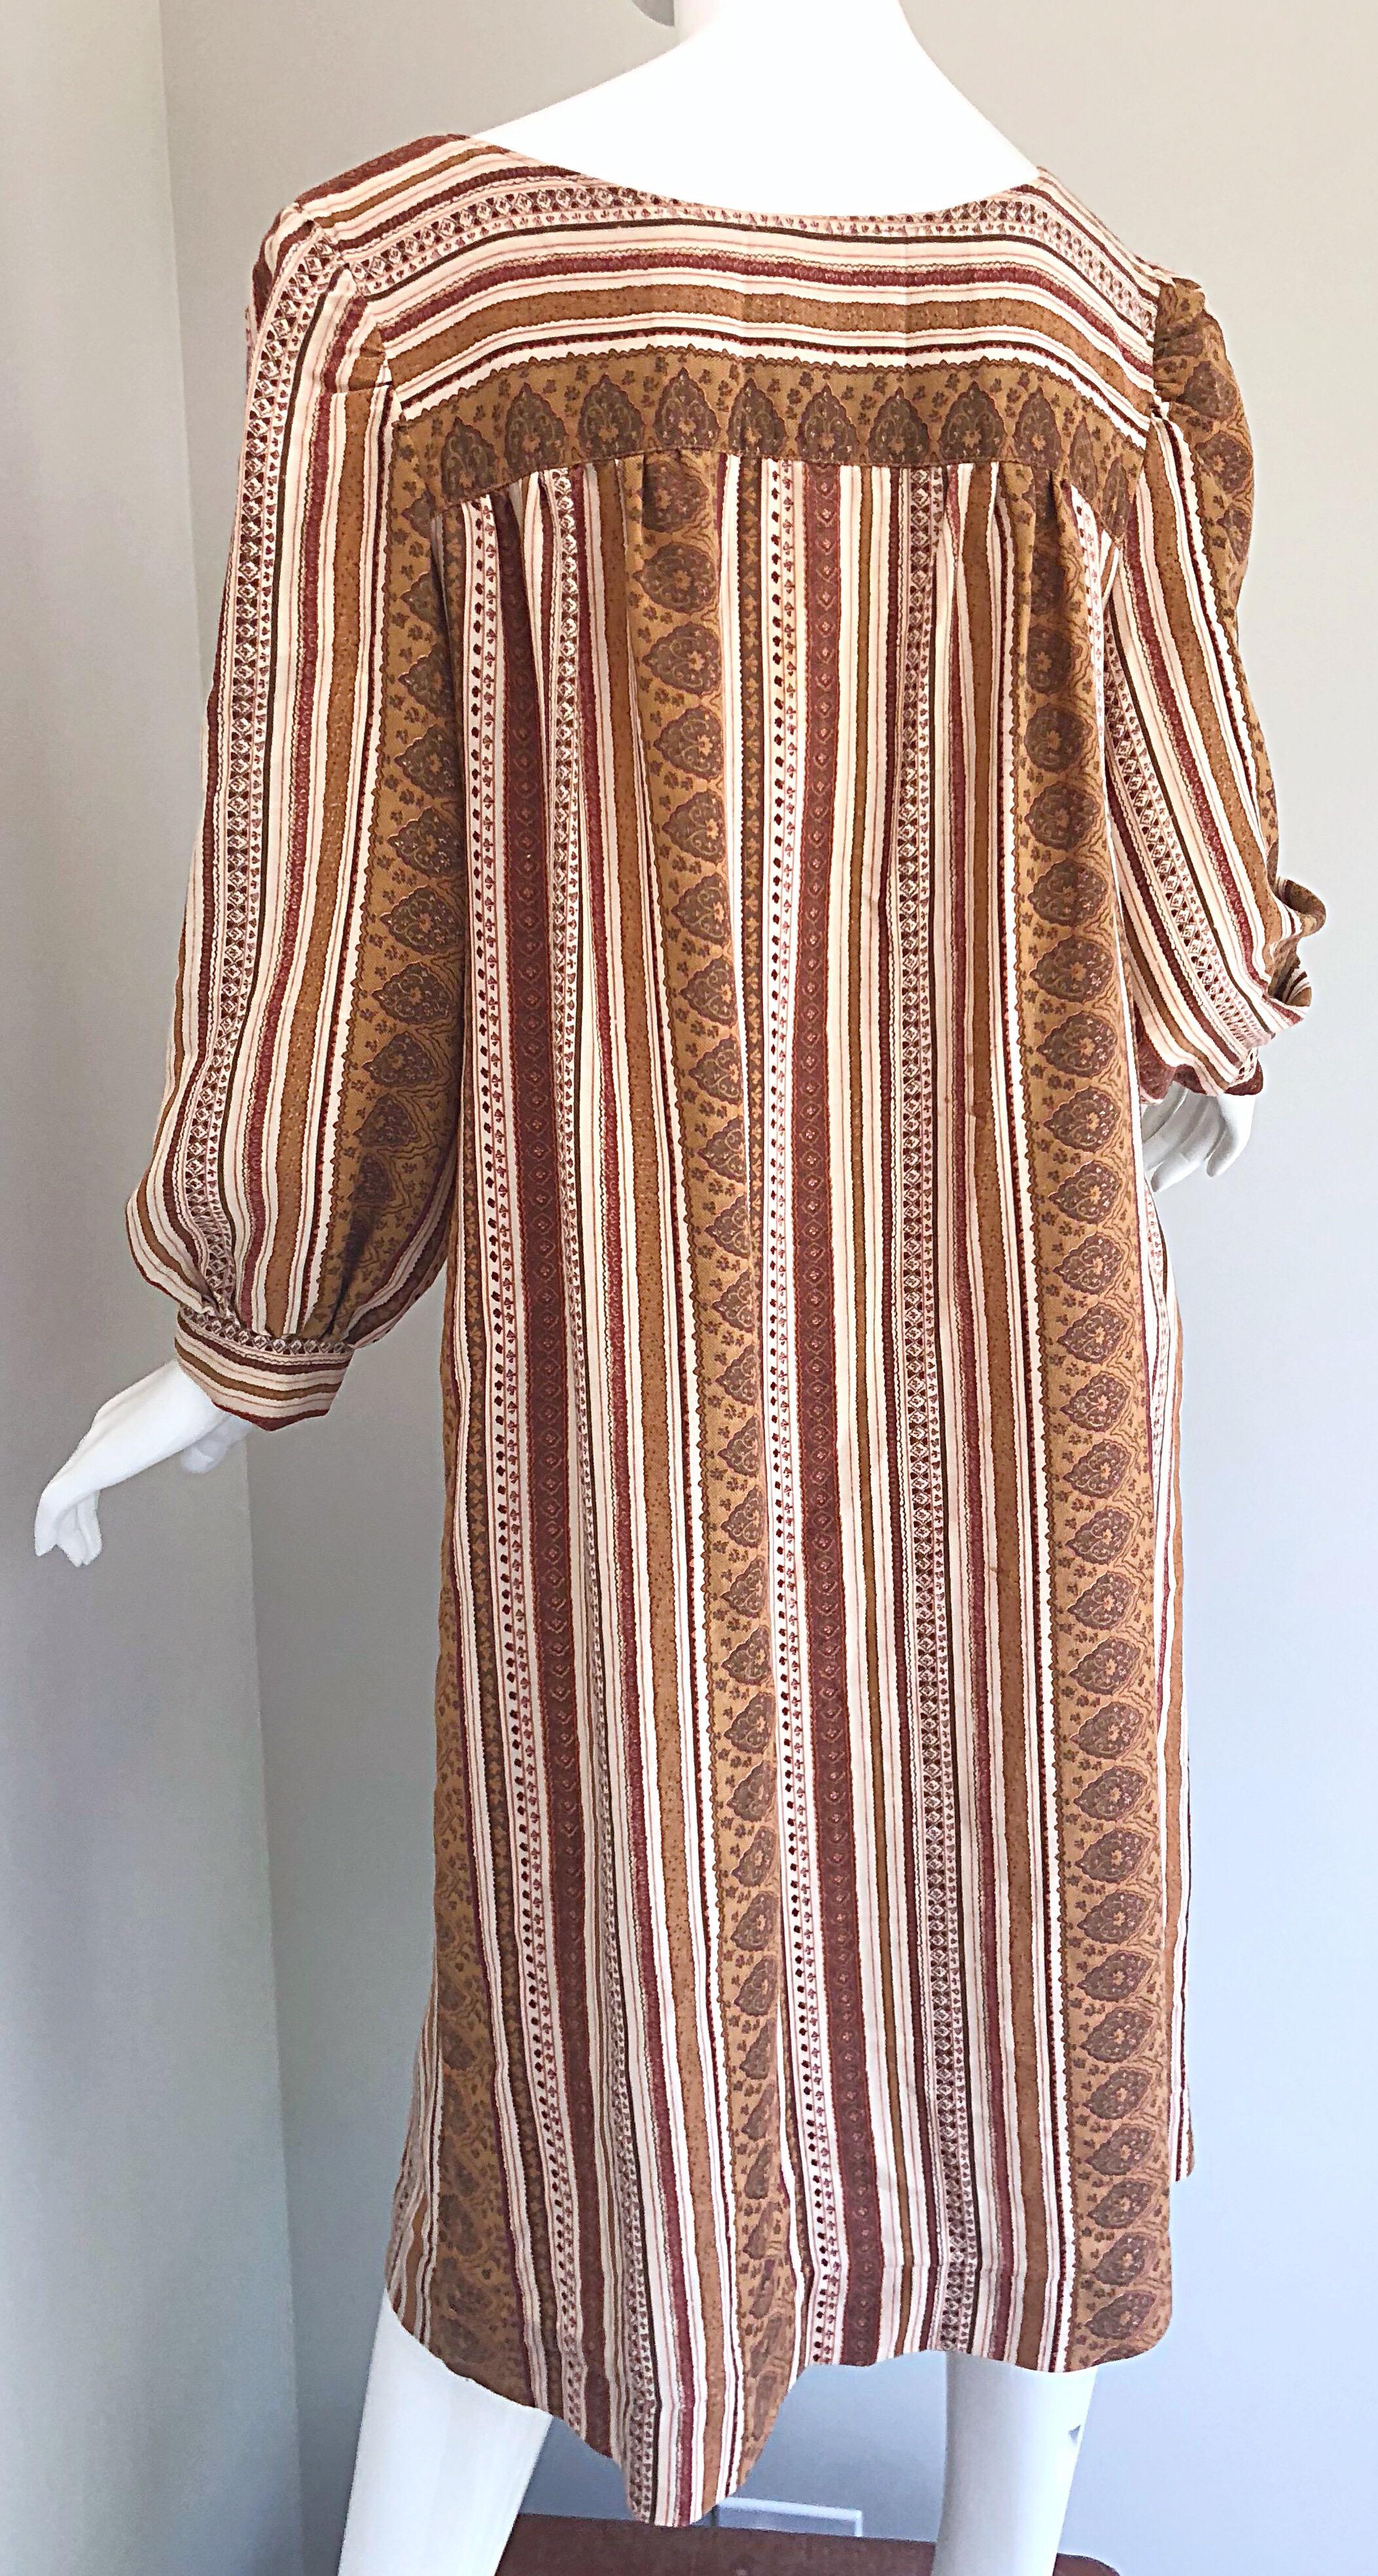 1970s Boho Chic Brown and Ivory Soft Cotton Paisley Print Vintage 70s Dress 9